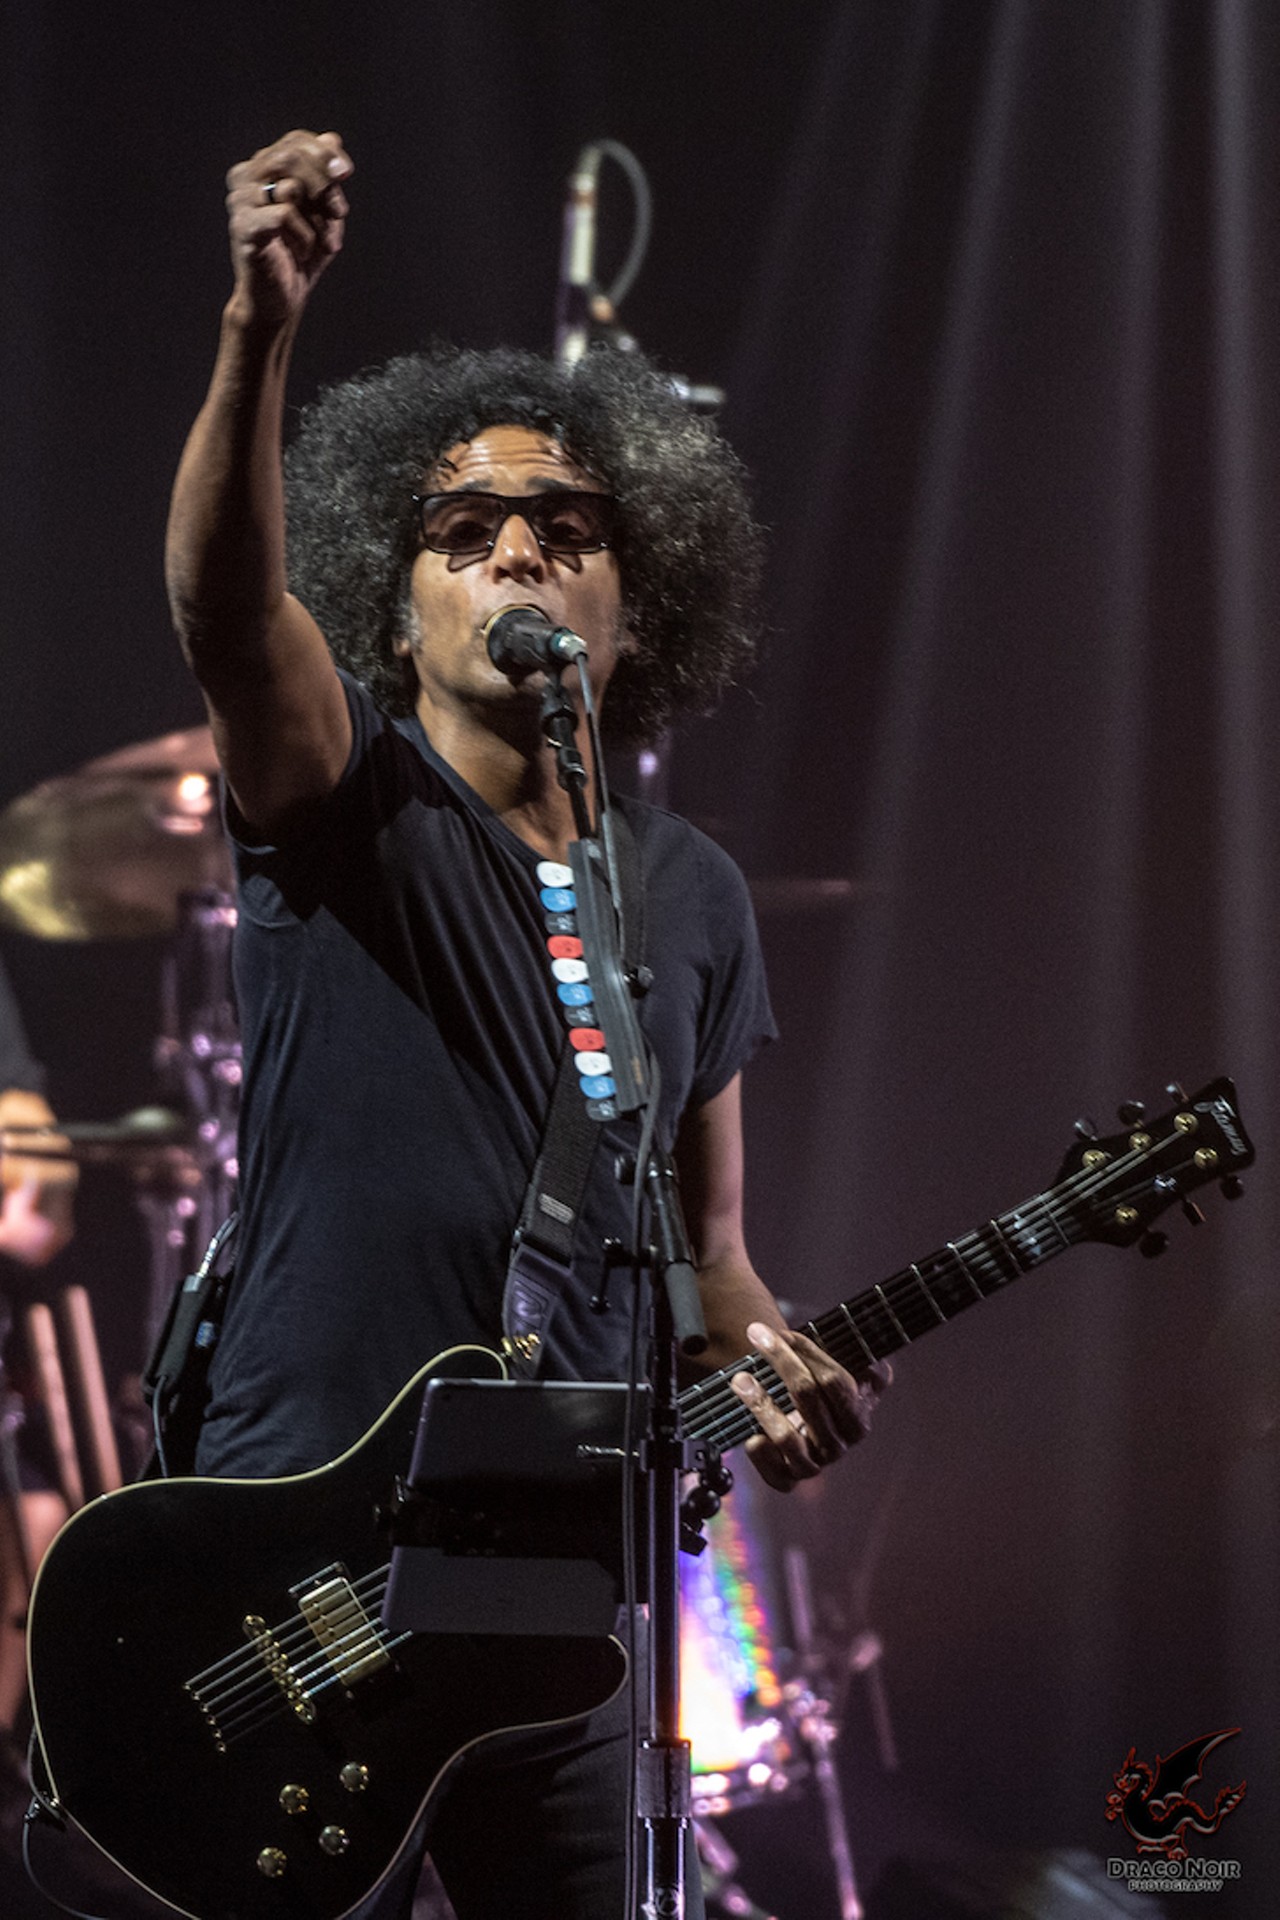 Photos from the sold-out Alice in Chains show at Hard Rock Live in Orlando